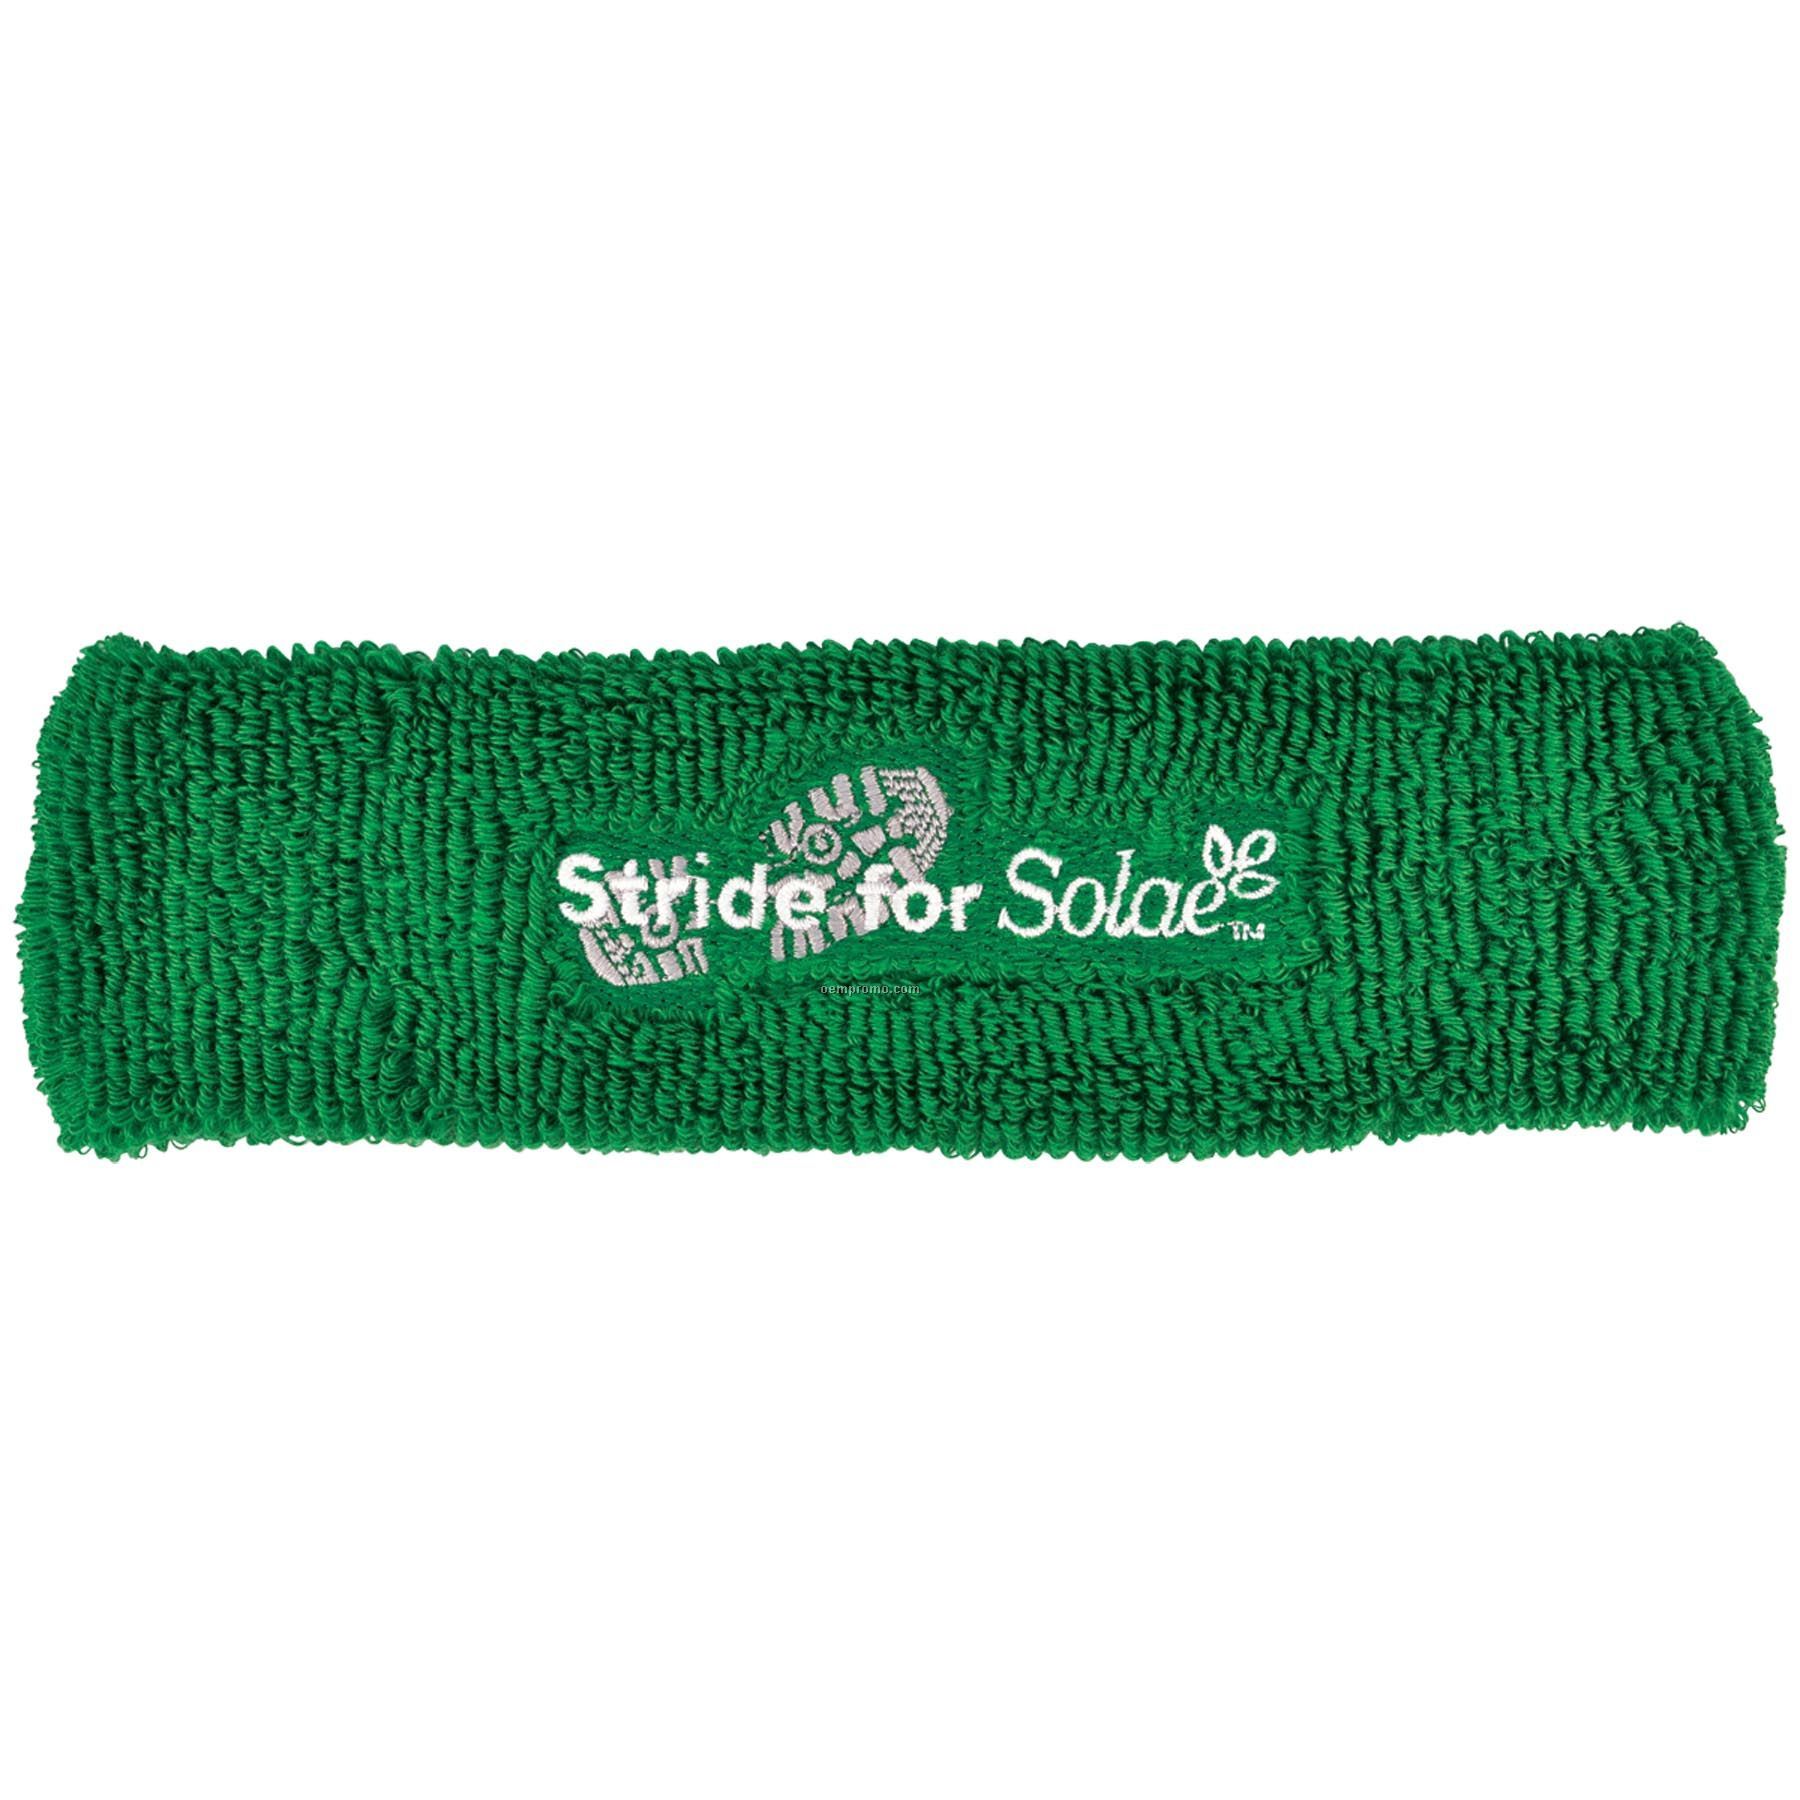 2" High 3-ply Ultimate Embroidered Headband Up To 7500 Stitches